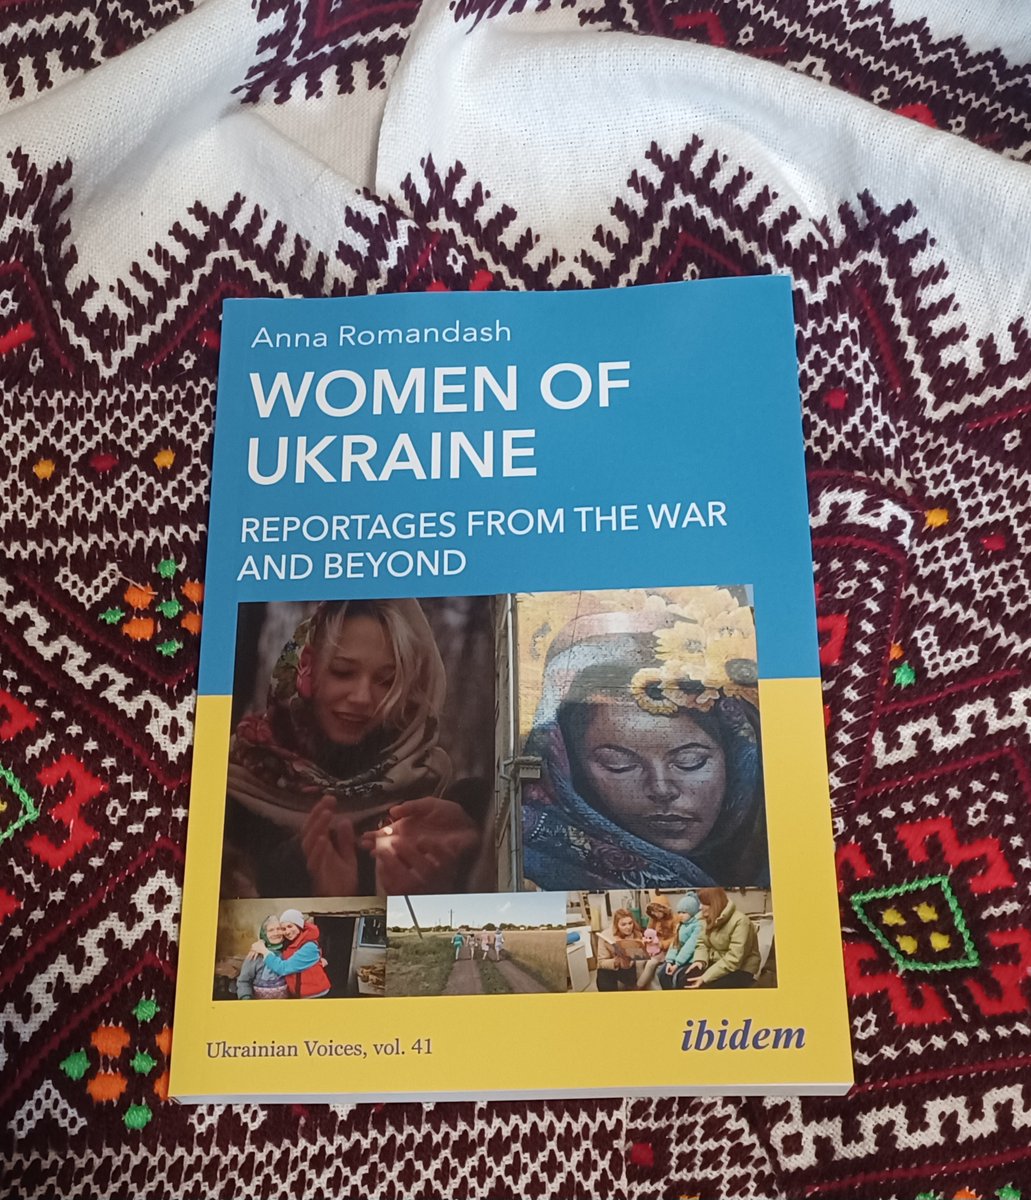 Доброй рано, dear friends. As we #standwithUkraine, continue supporting presses like @ibidem11. Their #Ukrainian Voices series is imperative at this time. Ibidem works to bring us books like WOMEN OF UKRAINE: REPORTAGES FROM THE WAR AND BEYOND. ibidem.eu/en/reihen/gese…